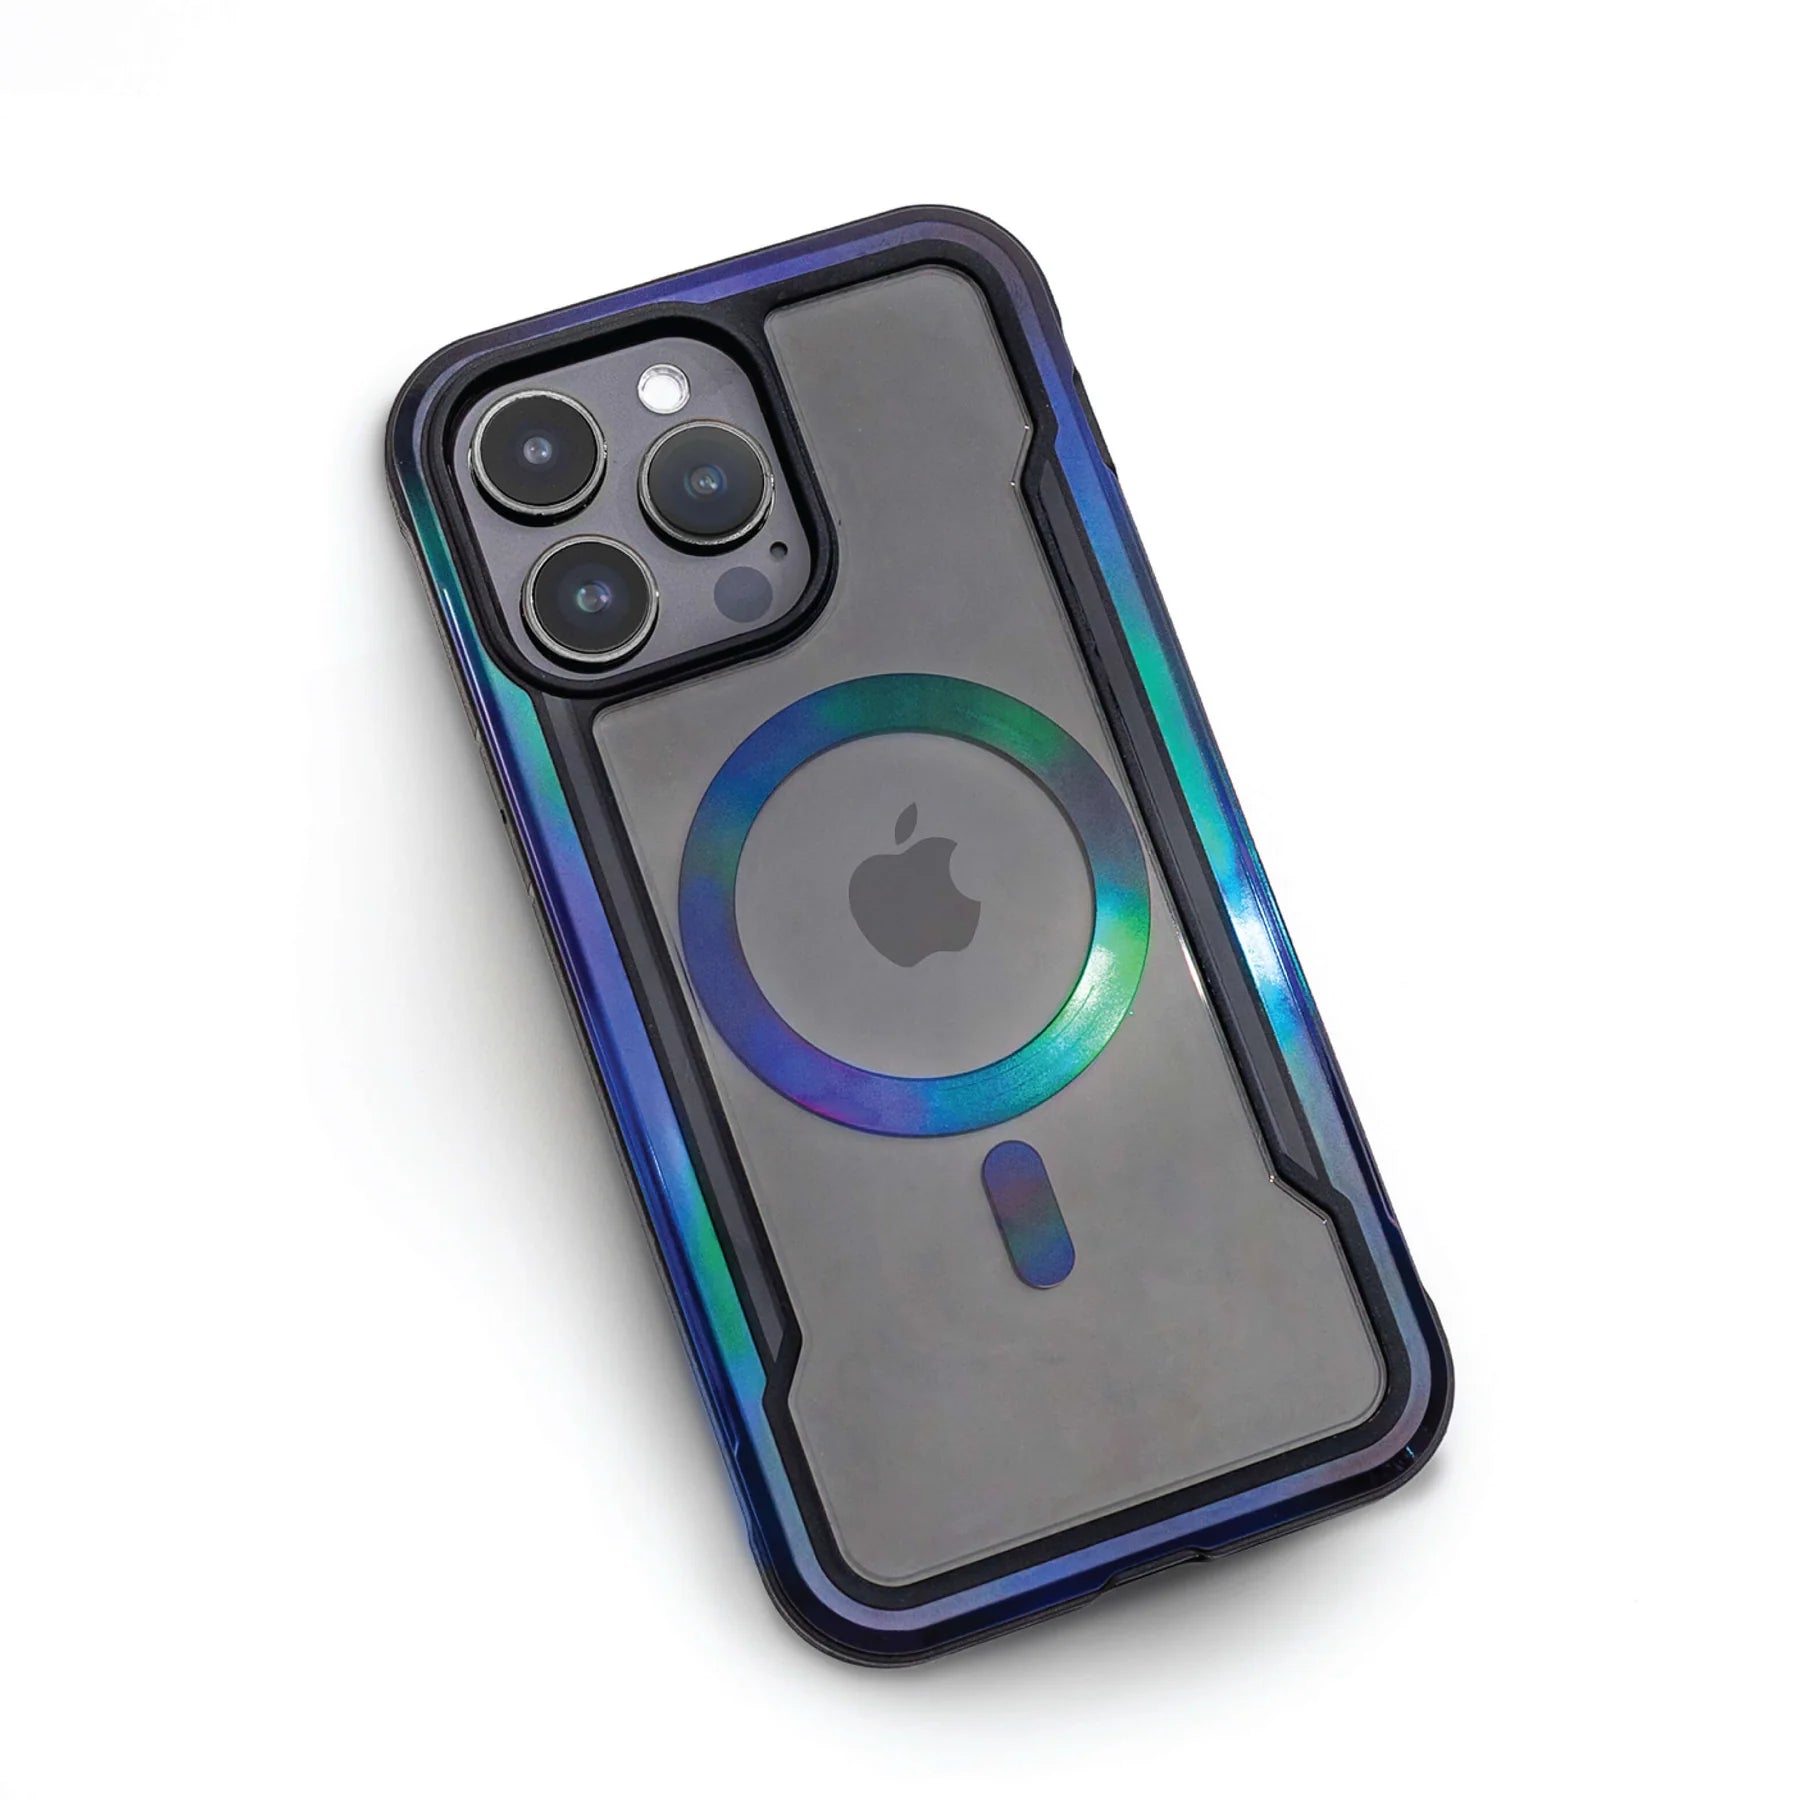 A iPhone 15 in a clear Raptic Shield 2.0 case with a visible apple logo, featuring three camera lenses and a colorful ring around the magnetic charging area.